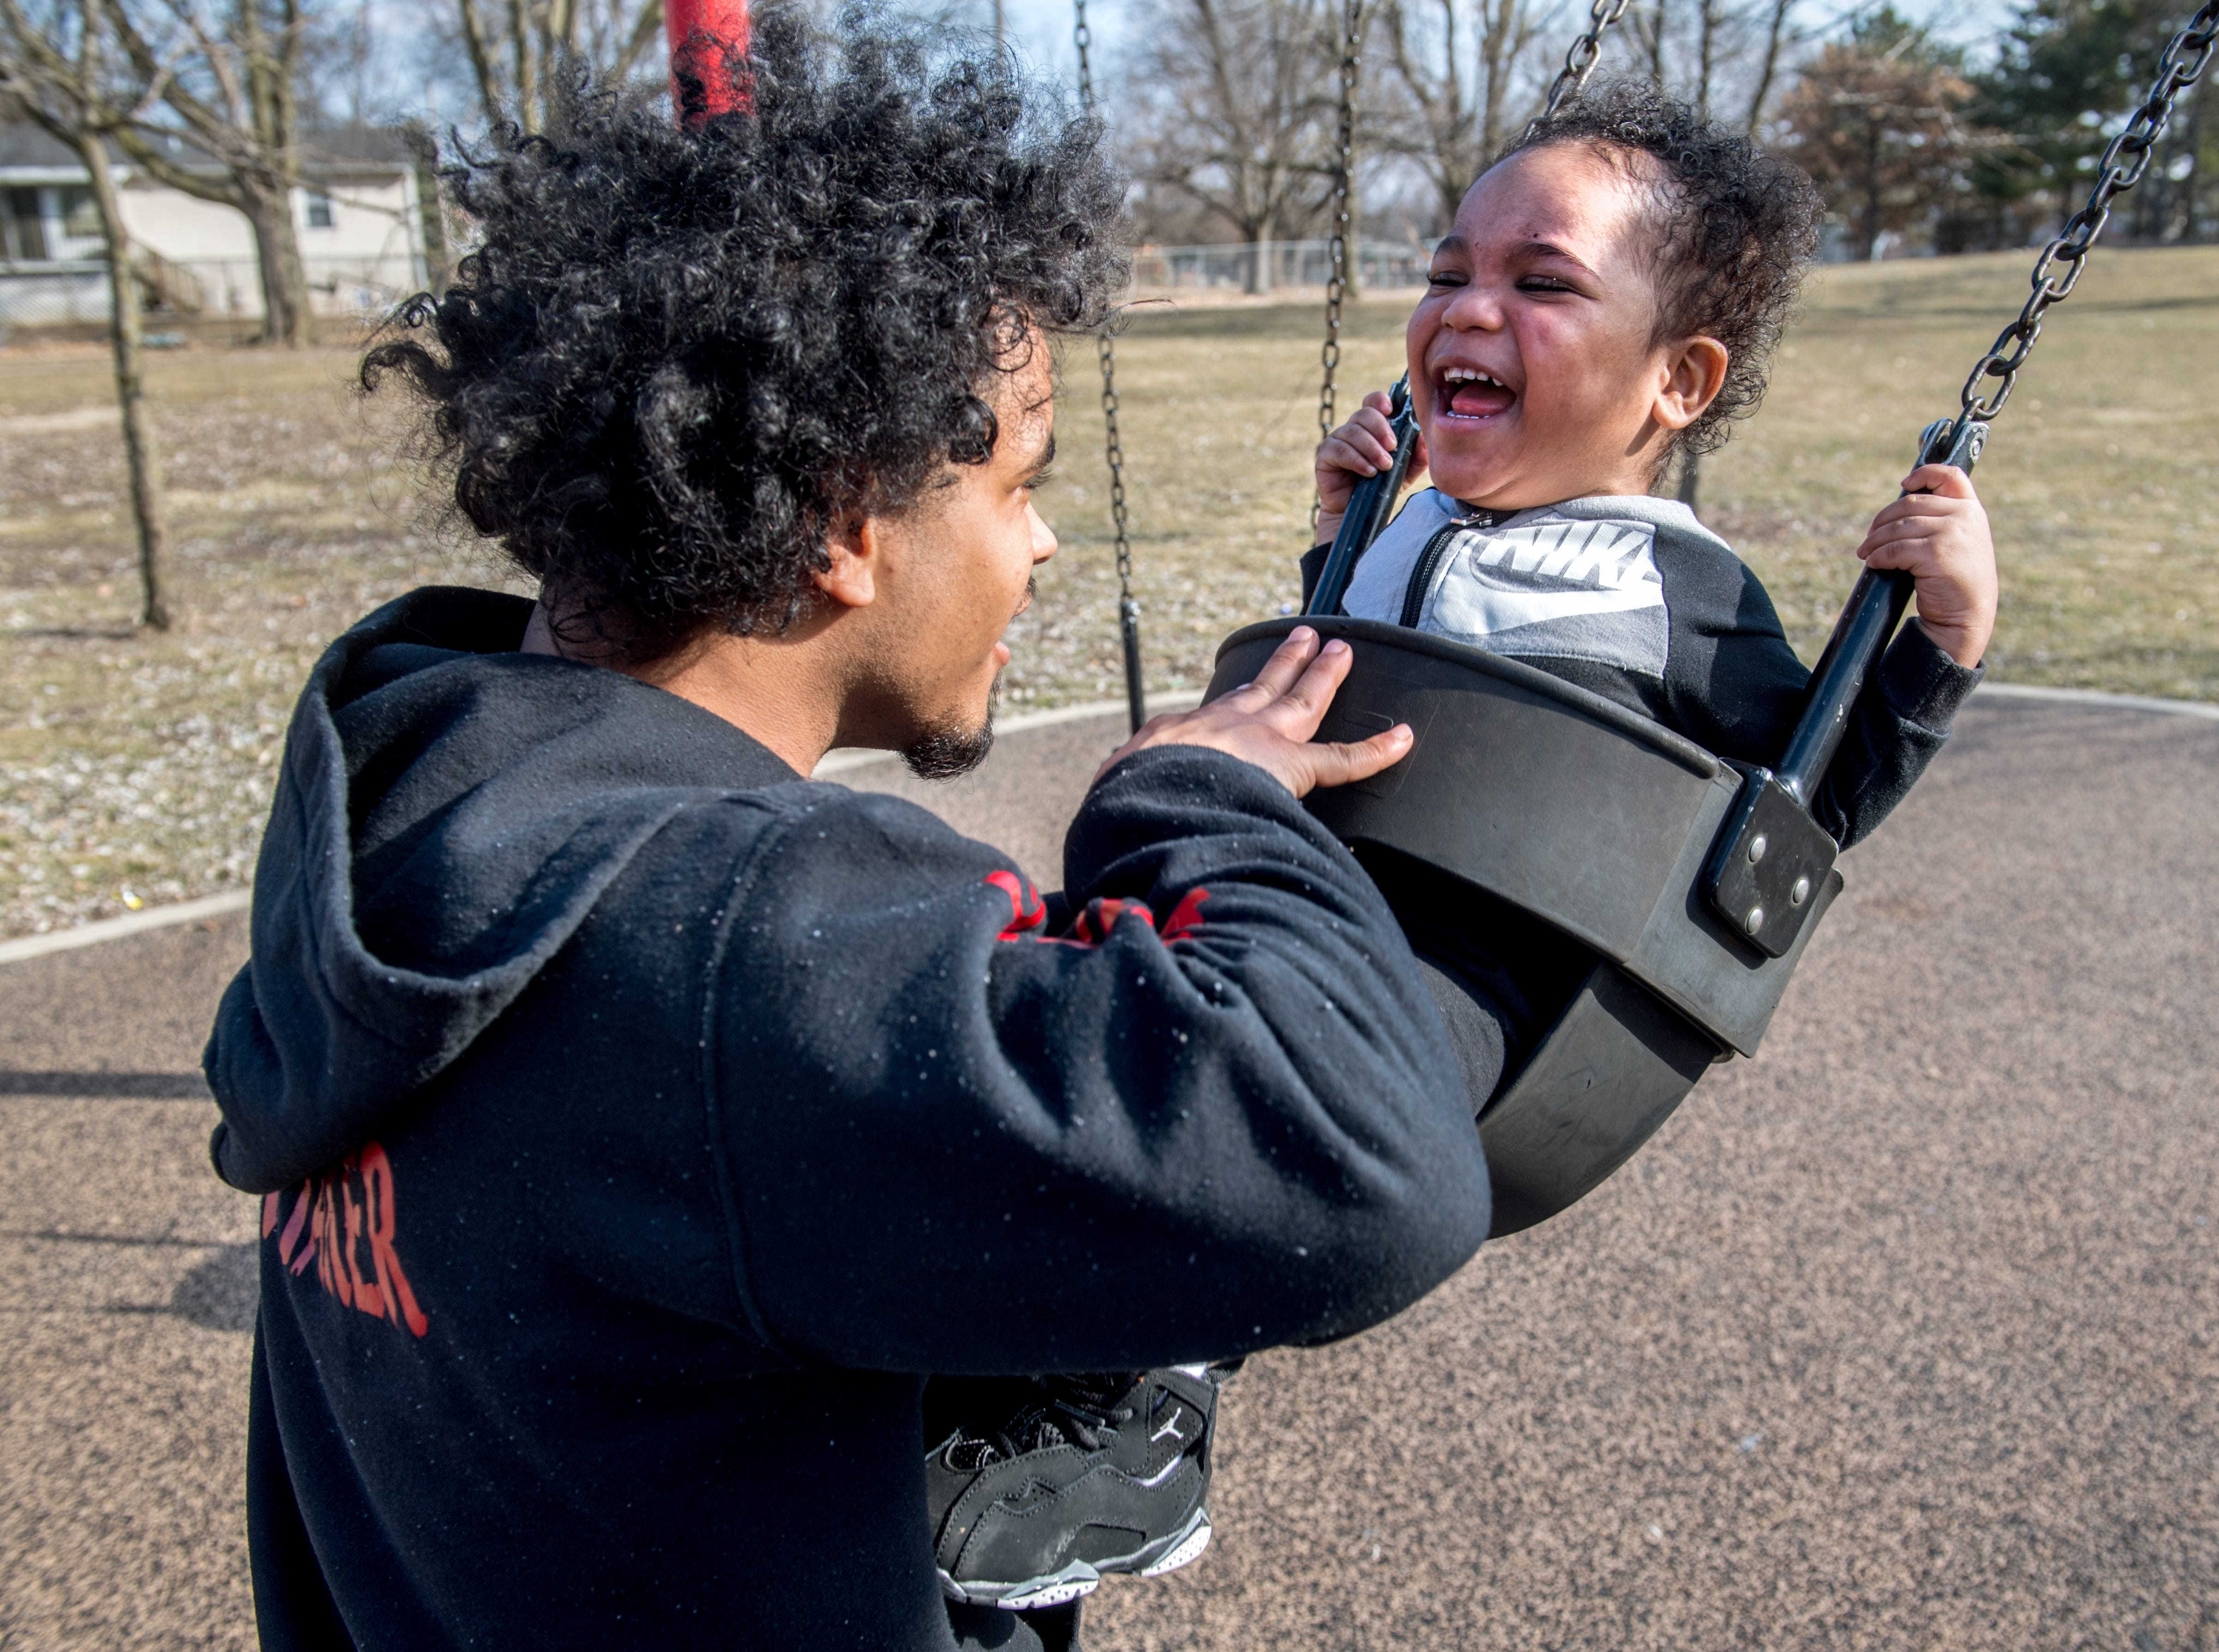 Tyémar Lawson, 2, gets the giggles as his father, Albert Bovan, pushes him on a swing on a sunny March 6, 2021, at Martin Luther King Jr. Park in South Peoria.